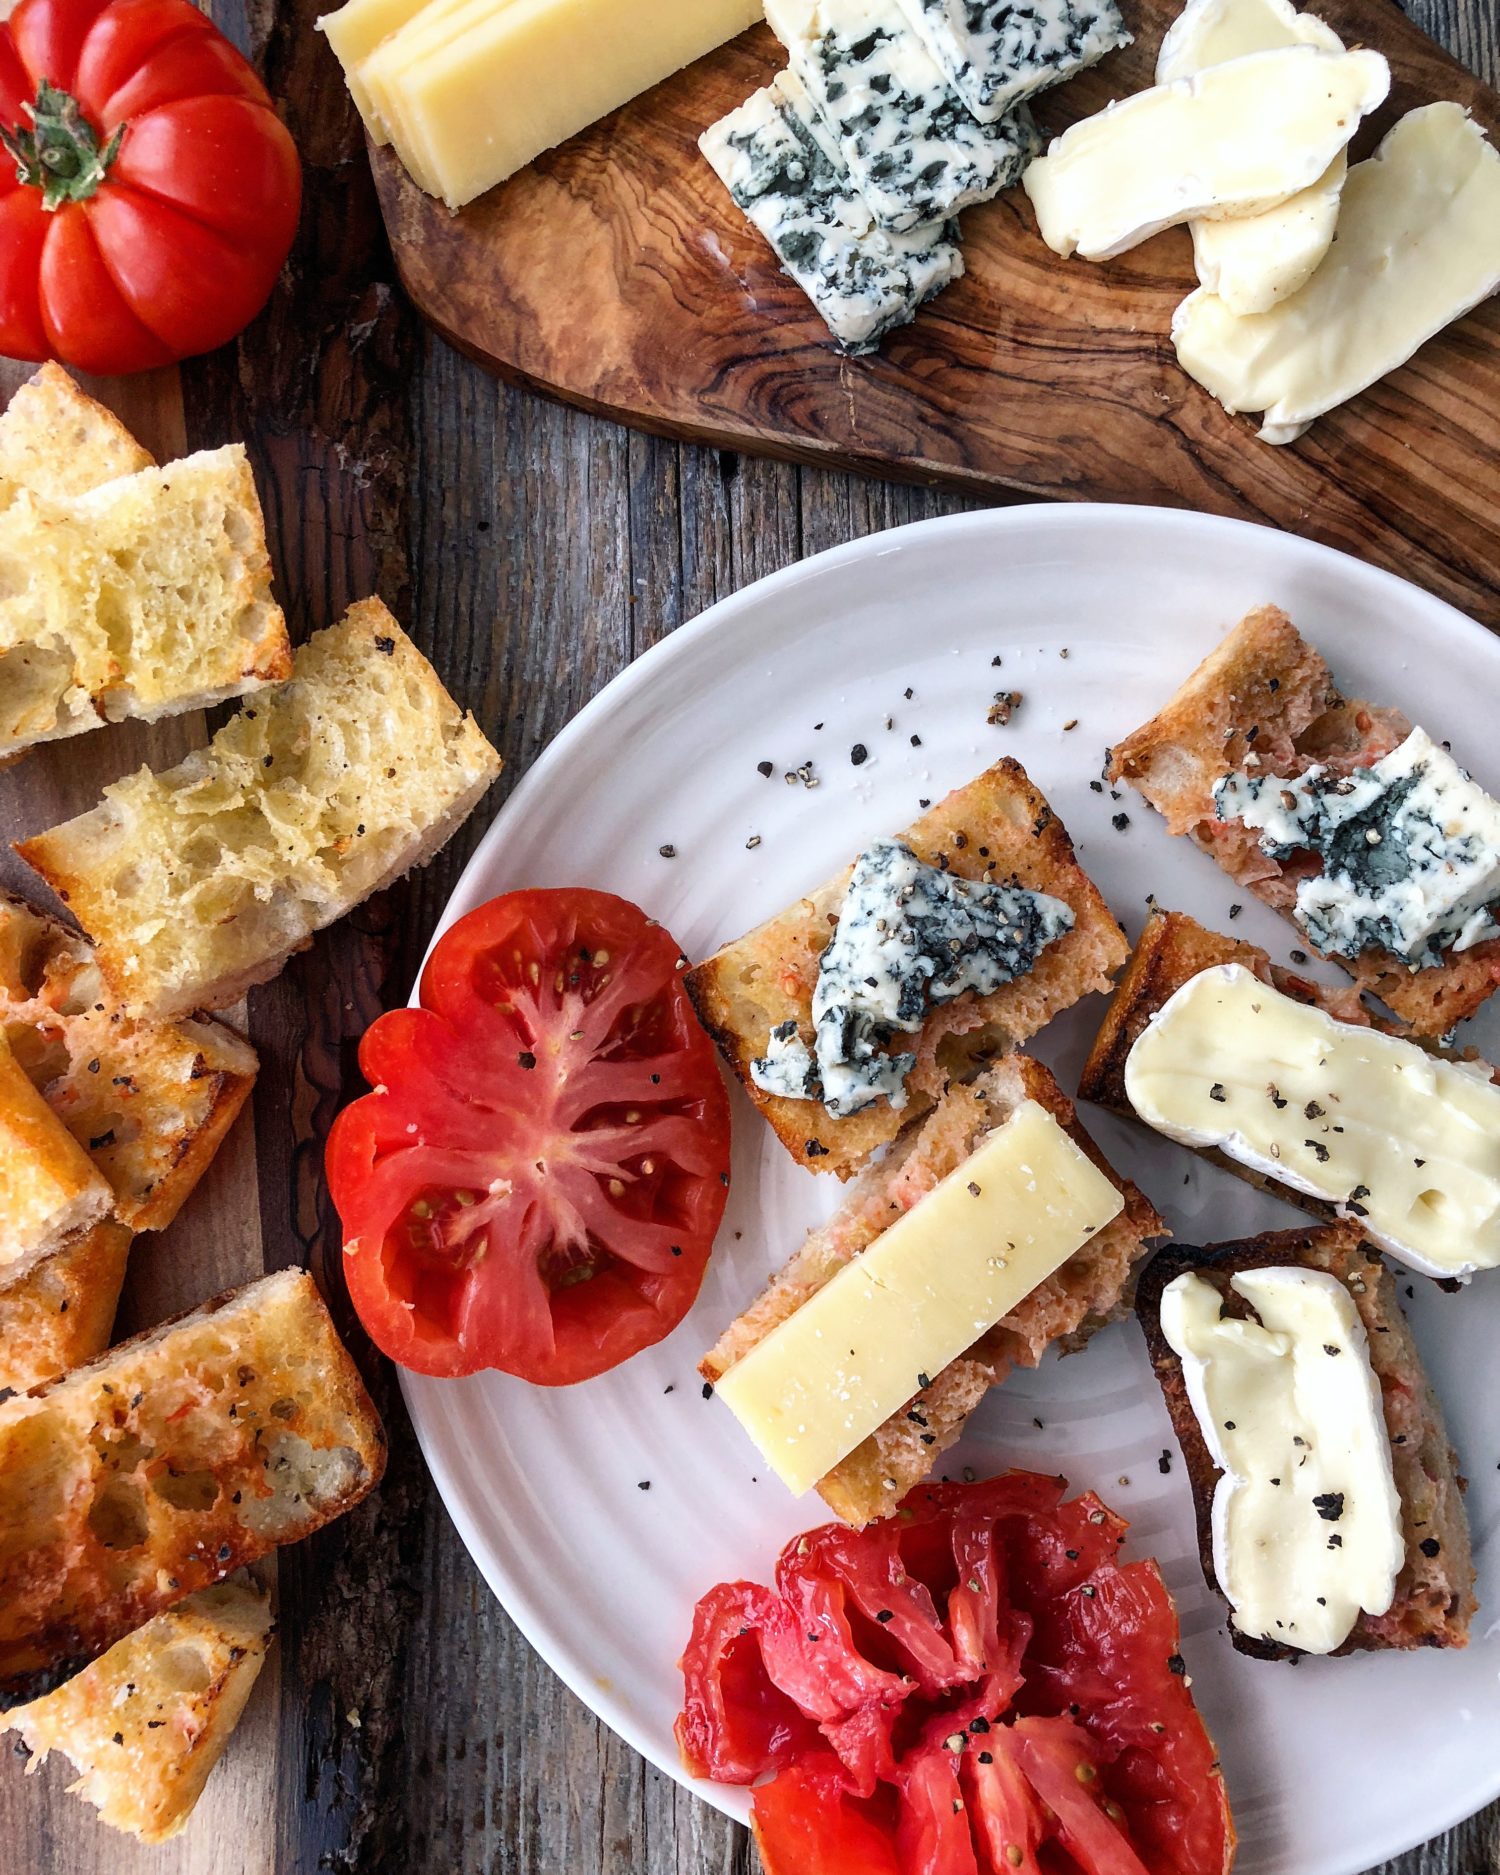 Grilled Ciabatta with Tomato and cheeses, pan con tomate